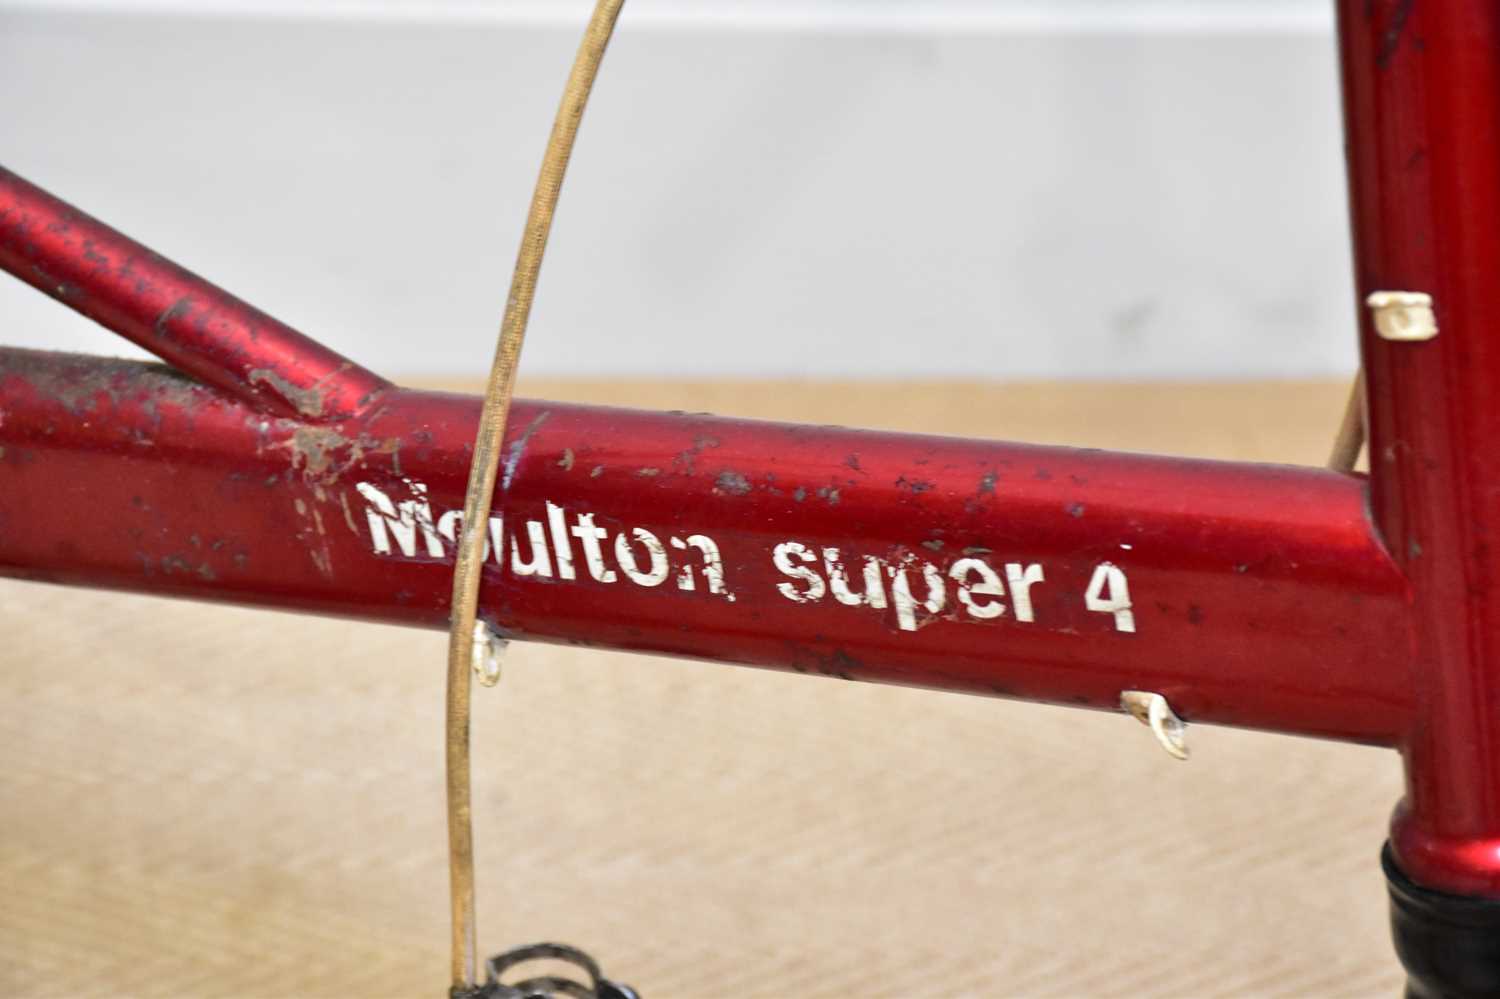 MOULTON SUPER 4; a vintage bicycle, and another similar with MM logo, (2) - Image 3 of 4